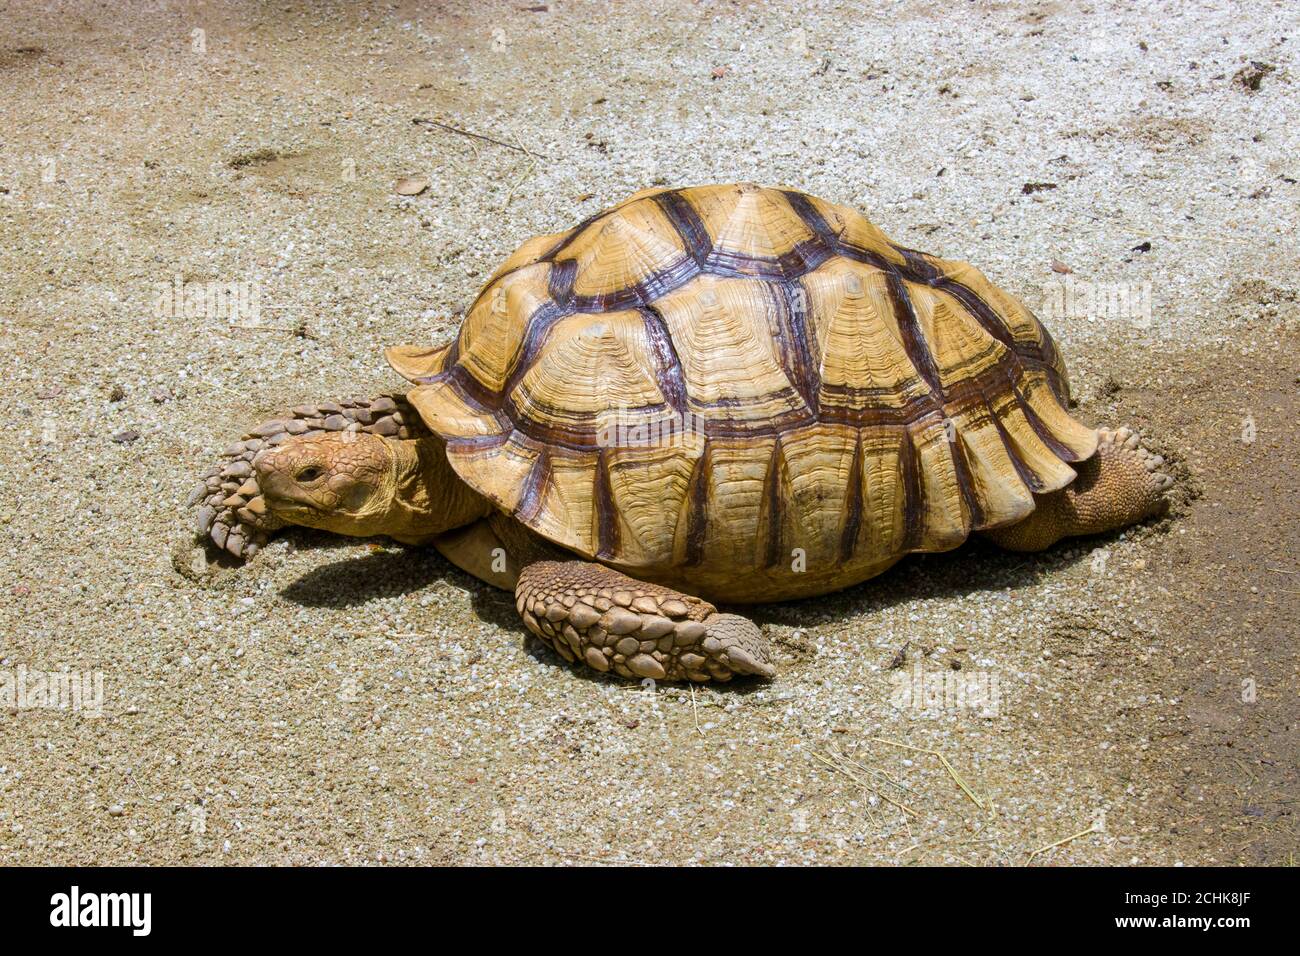 The African spurred tortoise (Centrochelys sulcata) is a species of tortoise, which inhabits the southern edge of the Sahara desert in Africa. Stock Photo